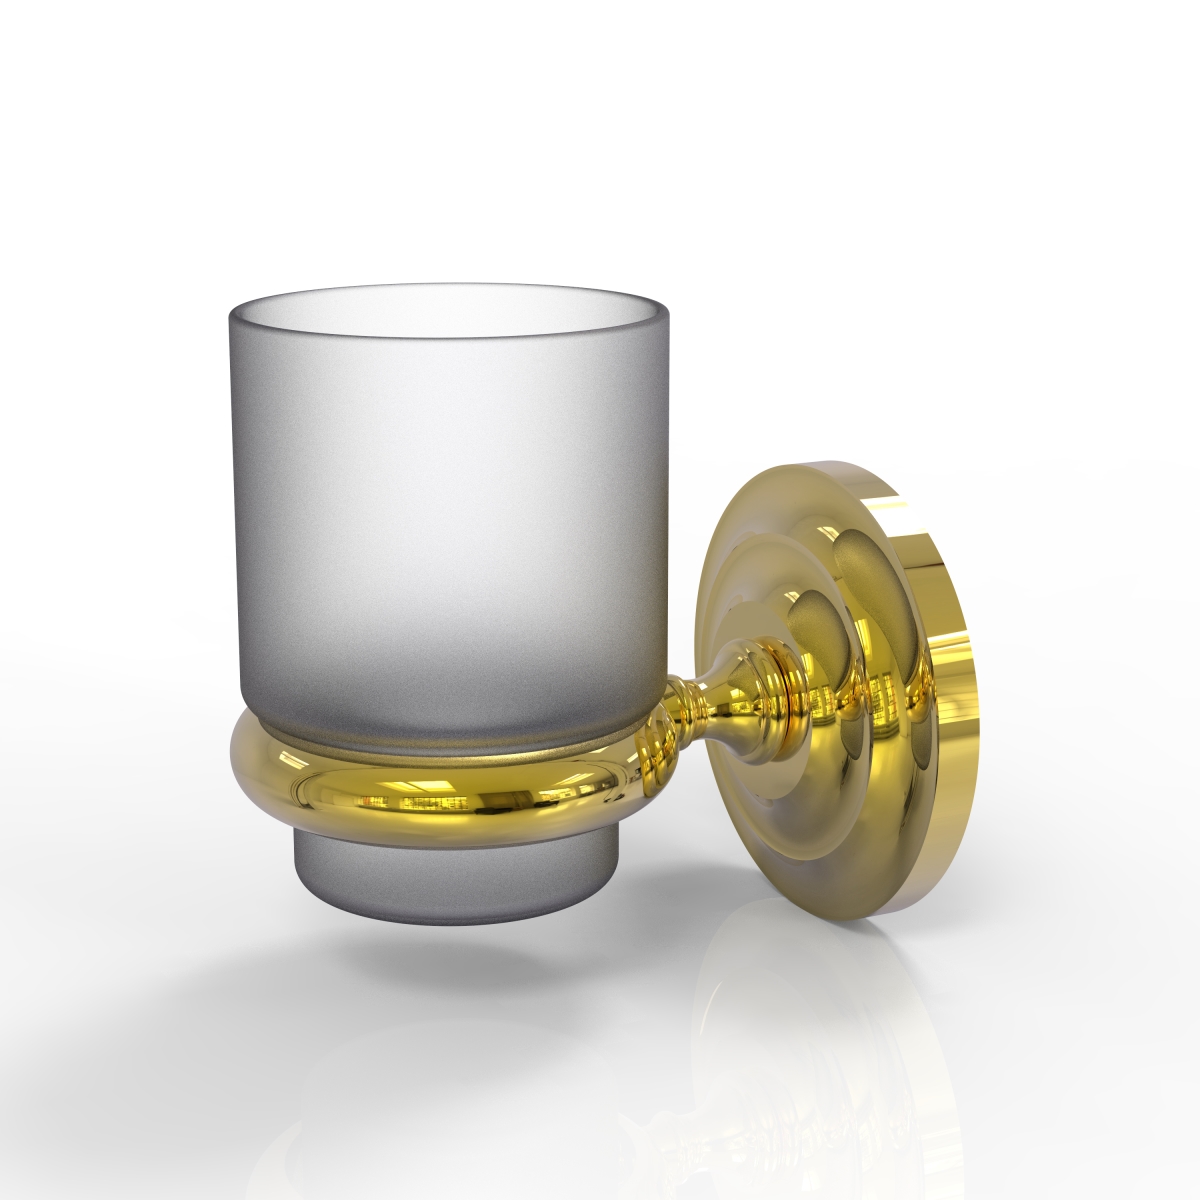 Pqn-64-unl Prestige Que New Collection Wall Mounted Votive Candle Holder, Unlacquered Brass